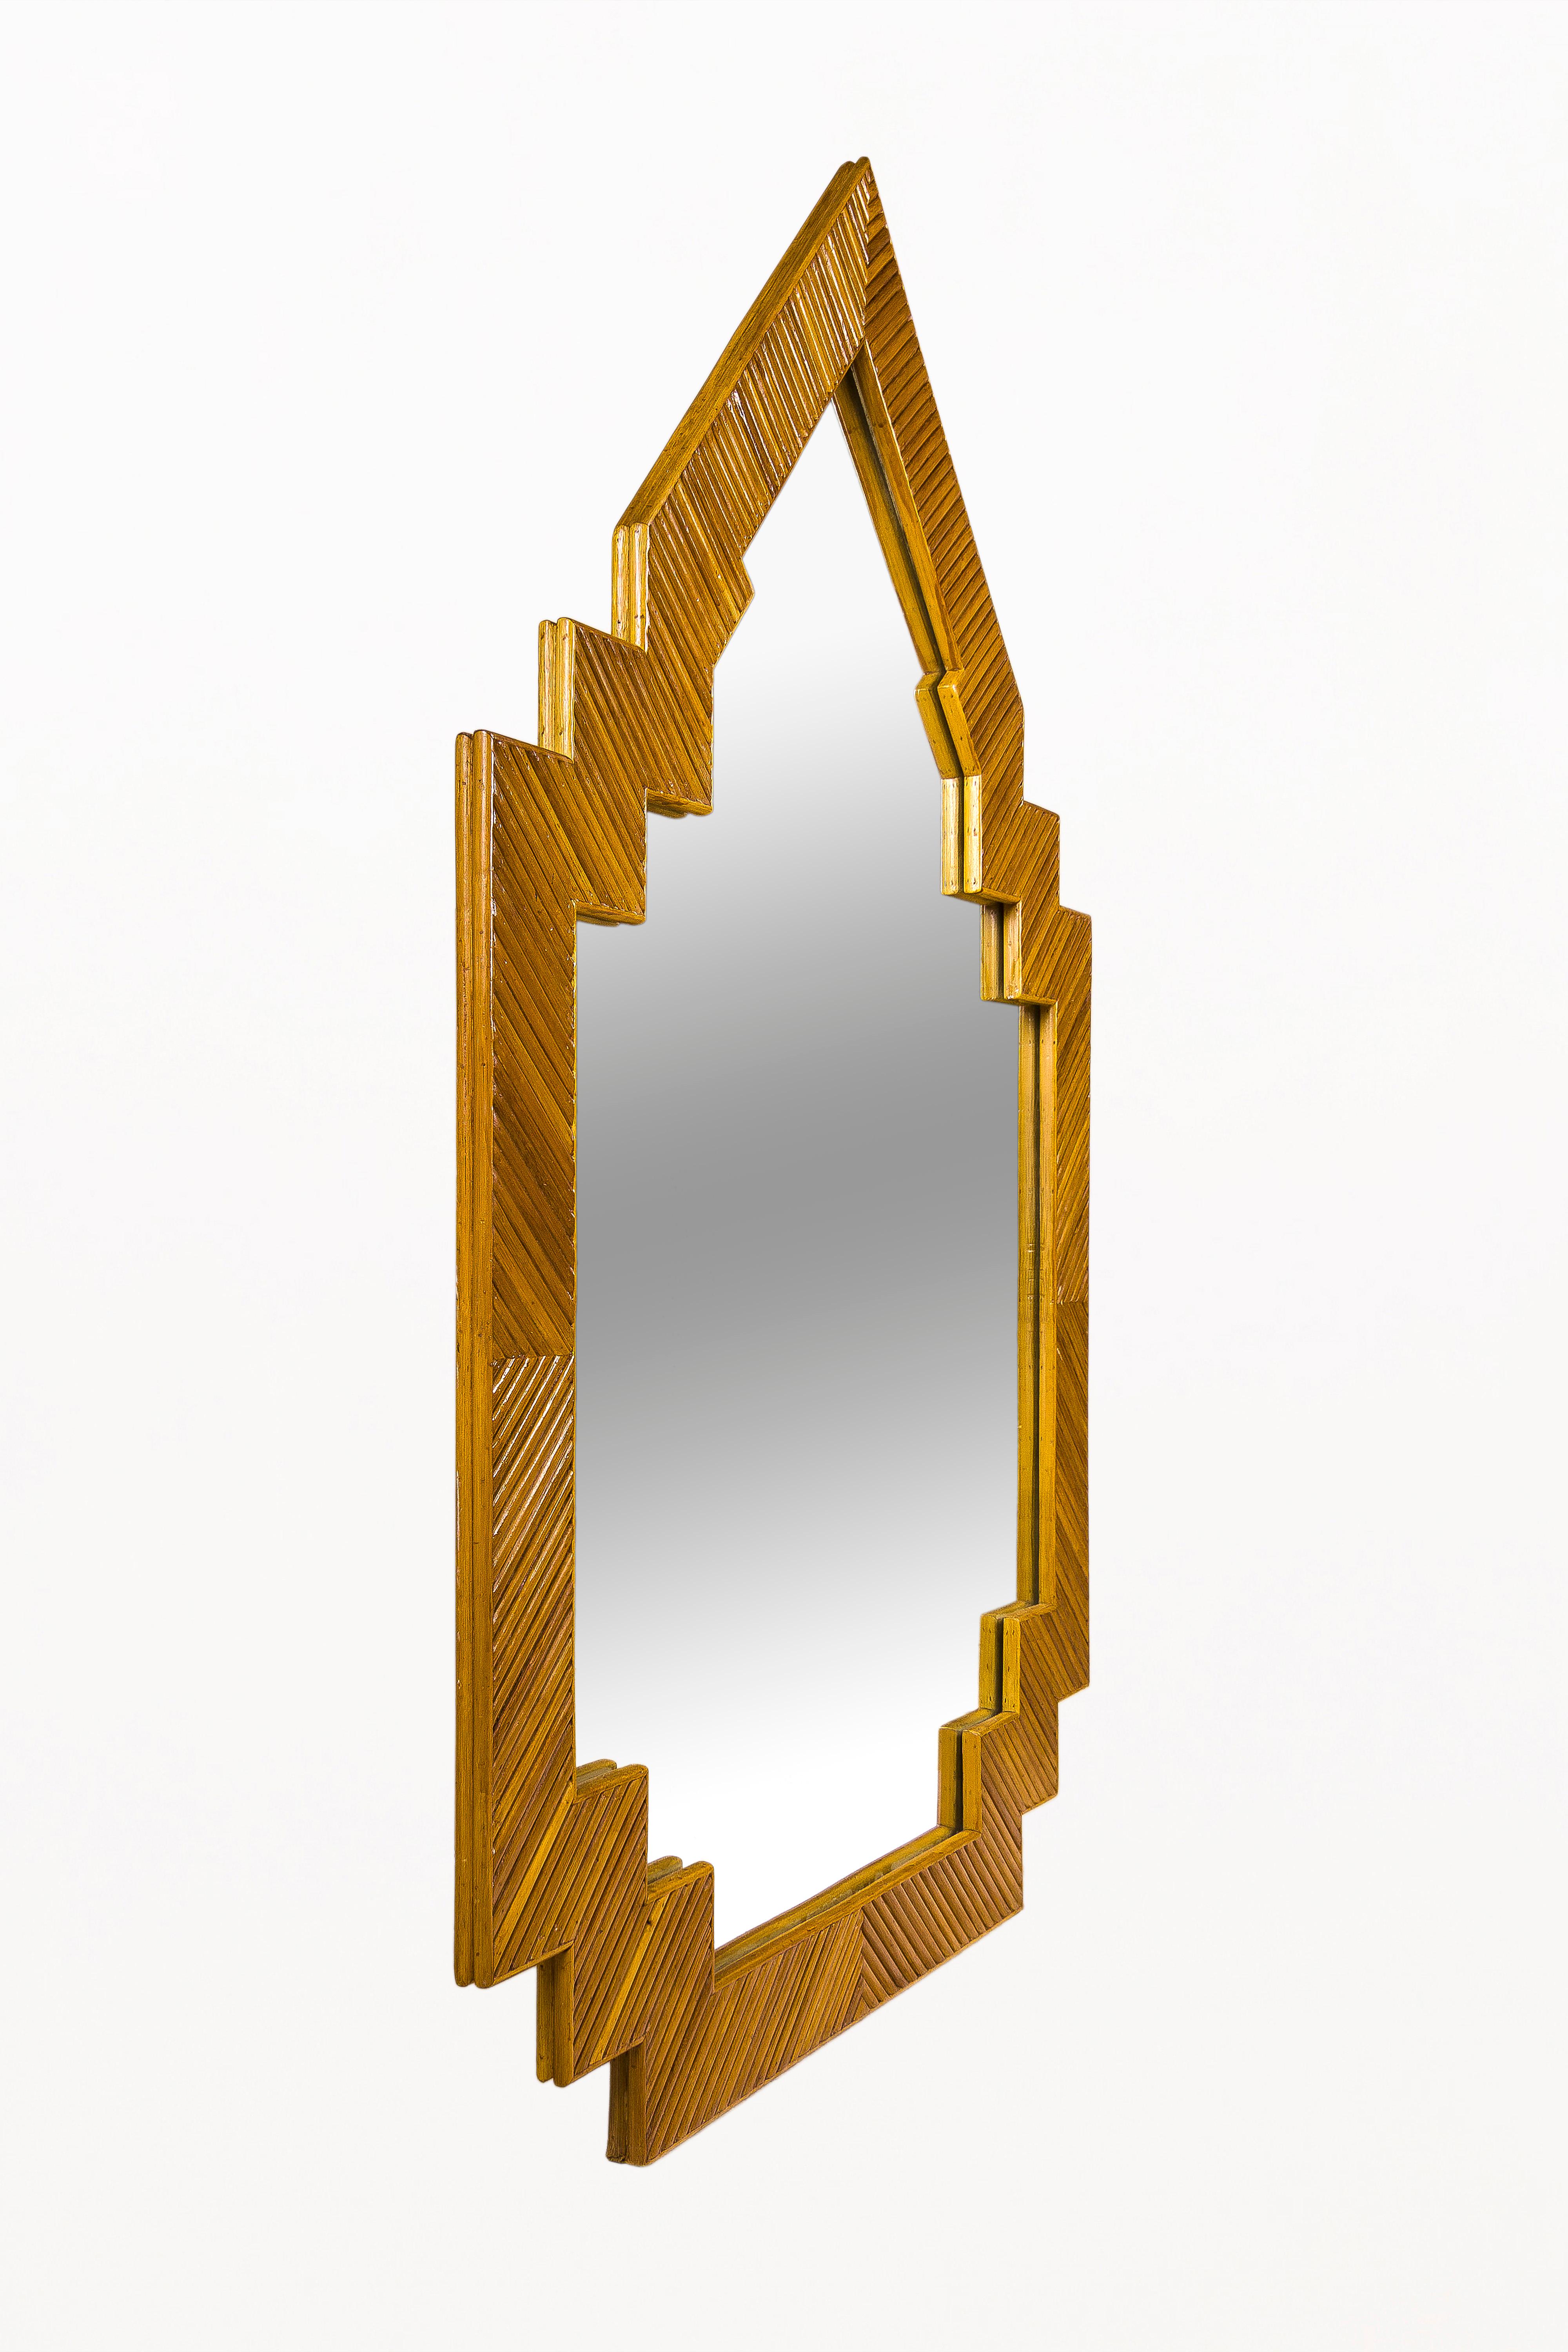 Wall mirror
Mirror with bamboo frame.
Large mirror and Frame.
Very well made
circa 1970, France 
Very good vintage condition.